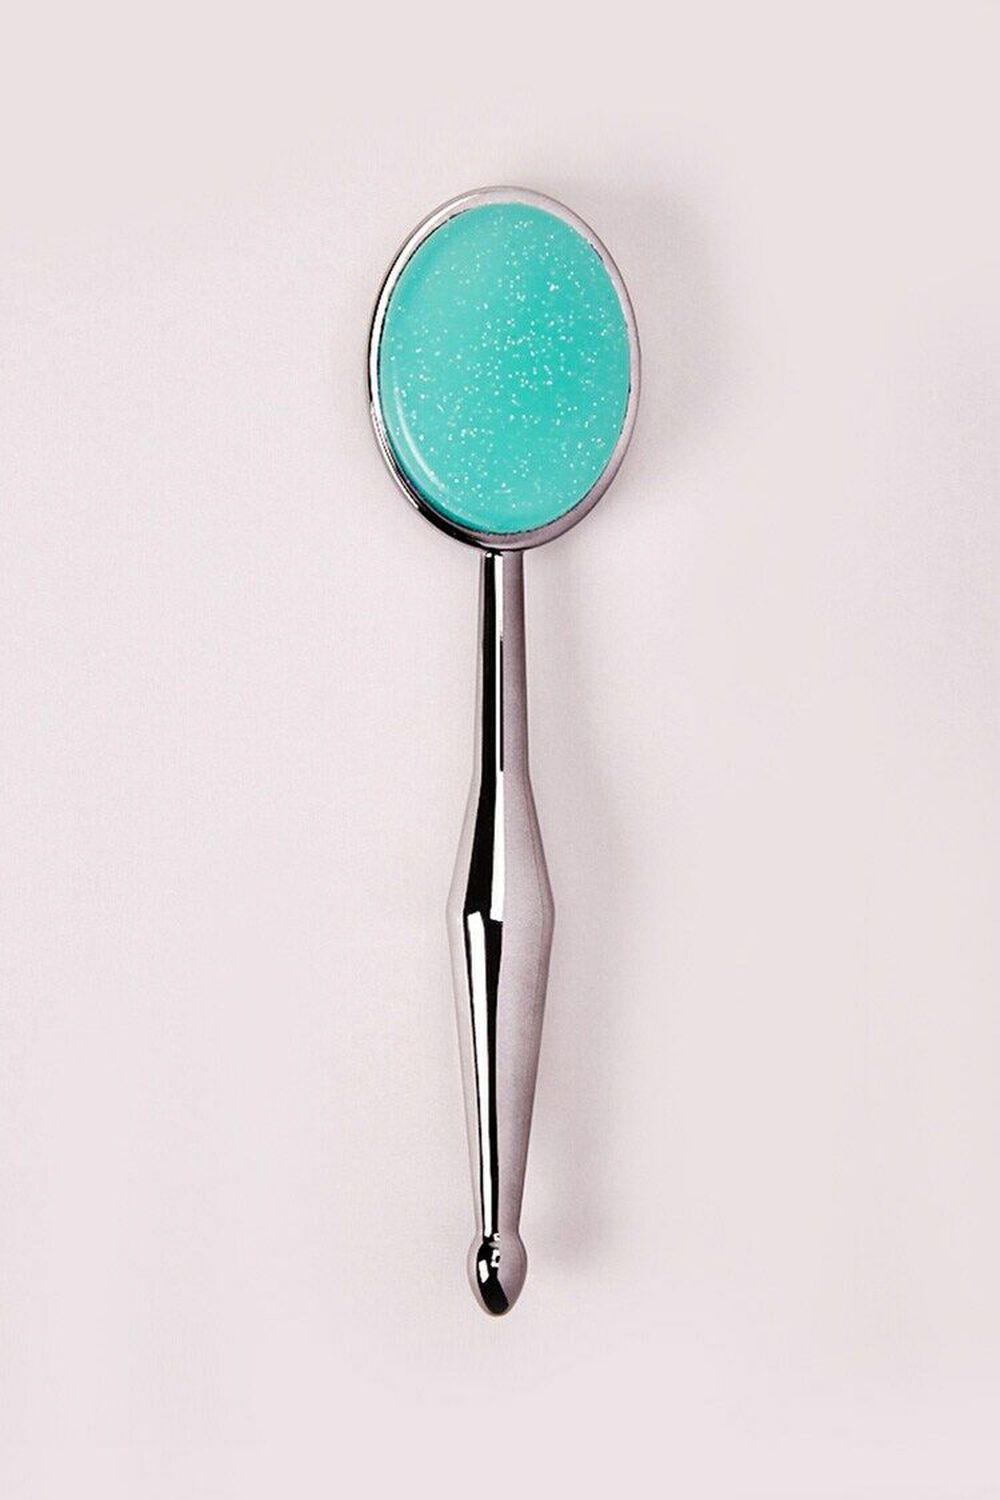 TEAL Large Oval Silicone Cosmetic Brush, image 1